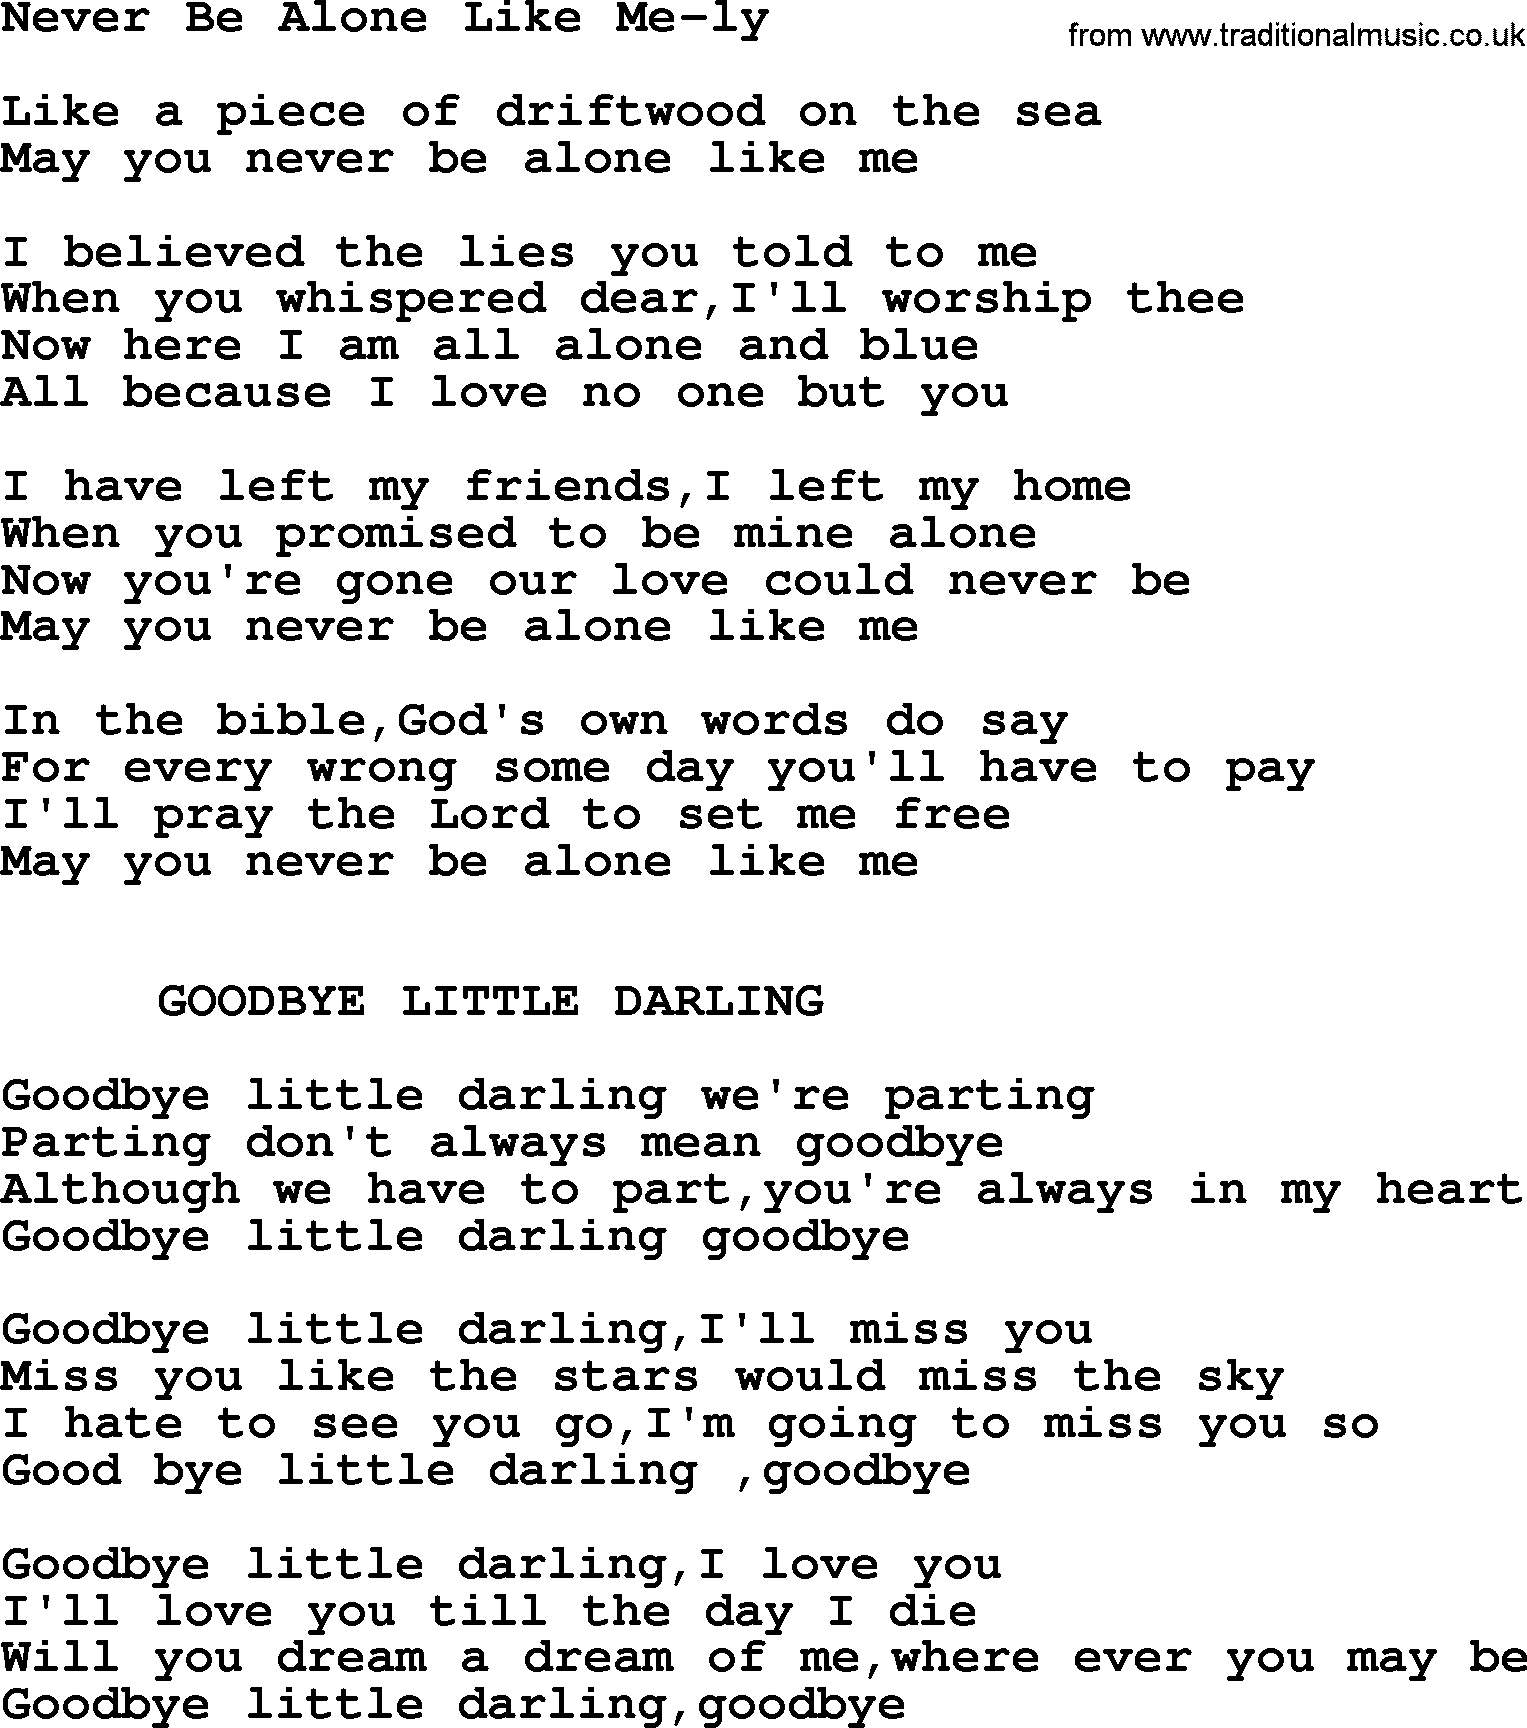 Hank Williams song Never Be Alone Like Me-ly, lyrics and chords